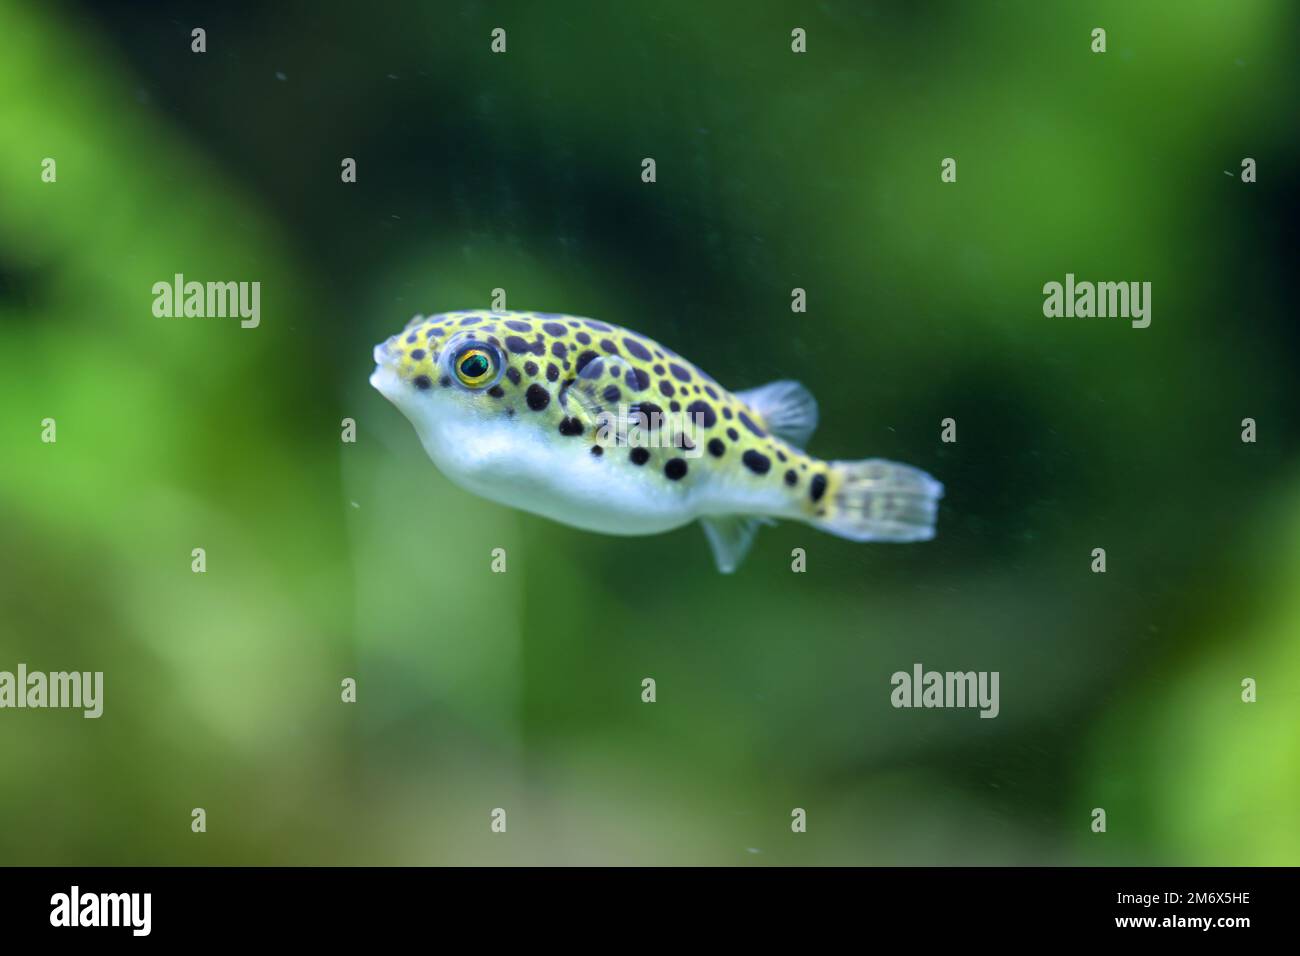 A small freshwater puffer fish in the aquarium. They feed on snails. Leopard puffer fish, Tetraodon Stock Photo